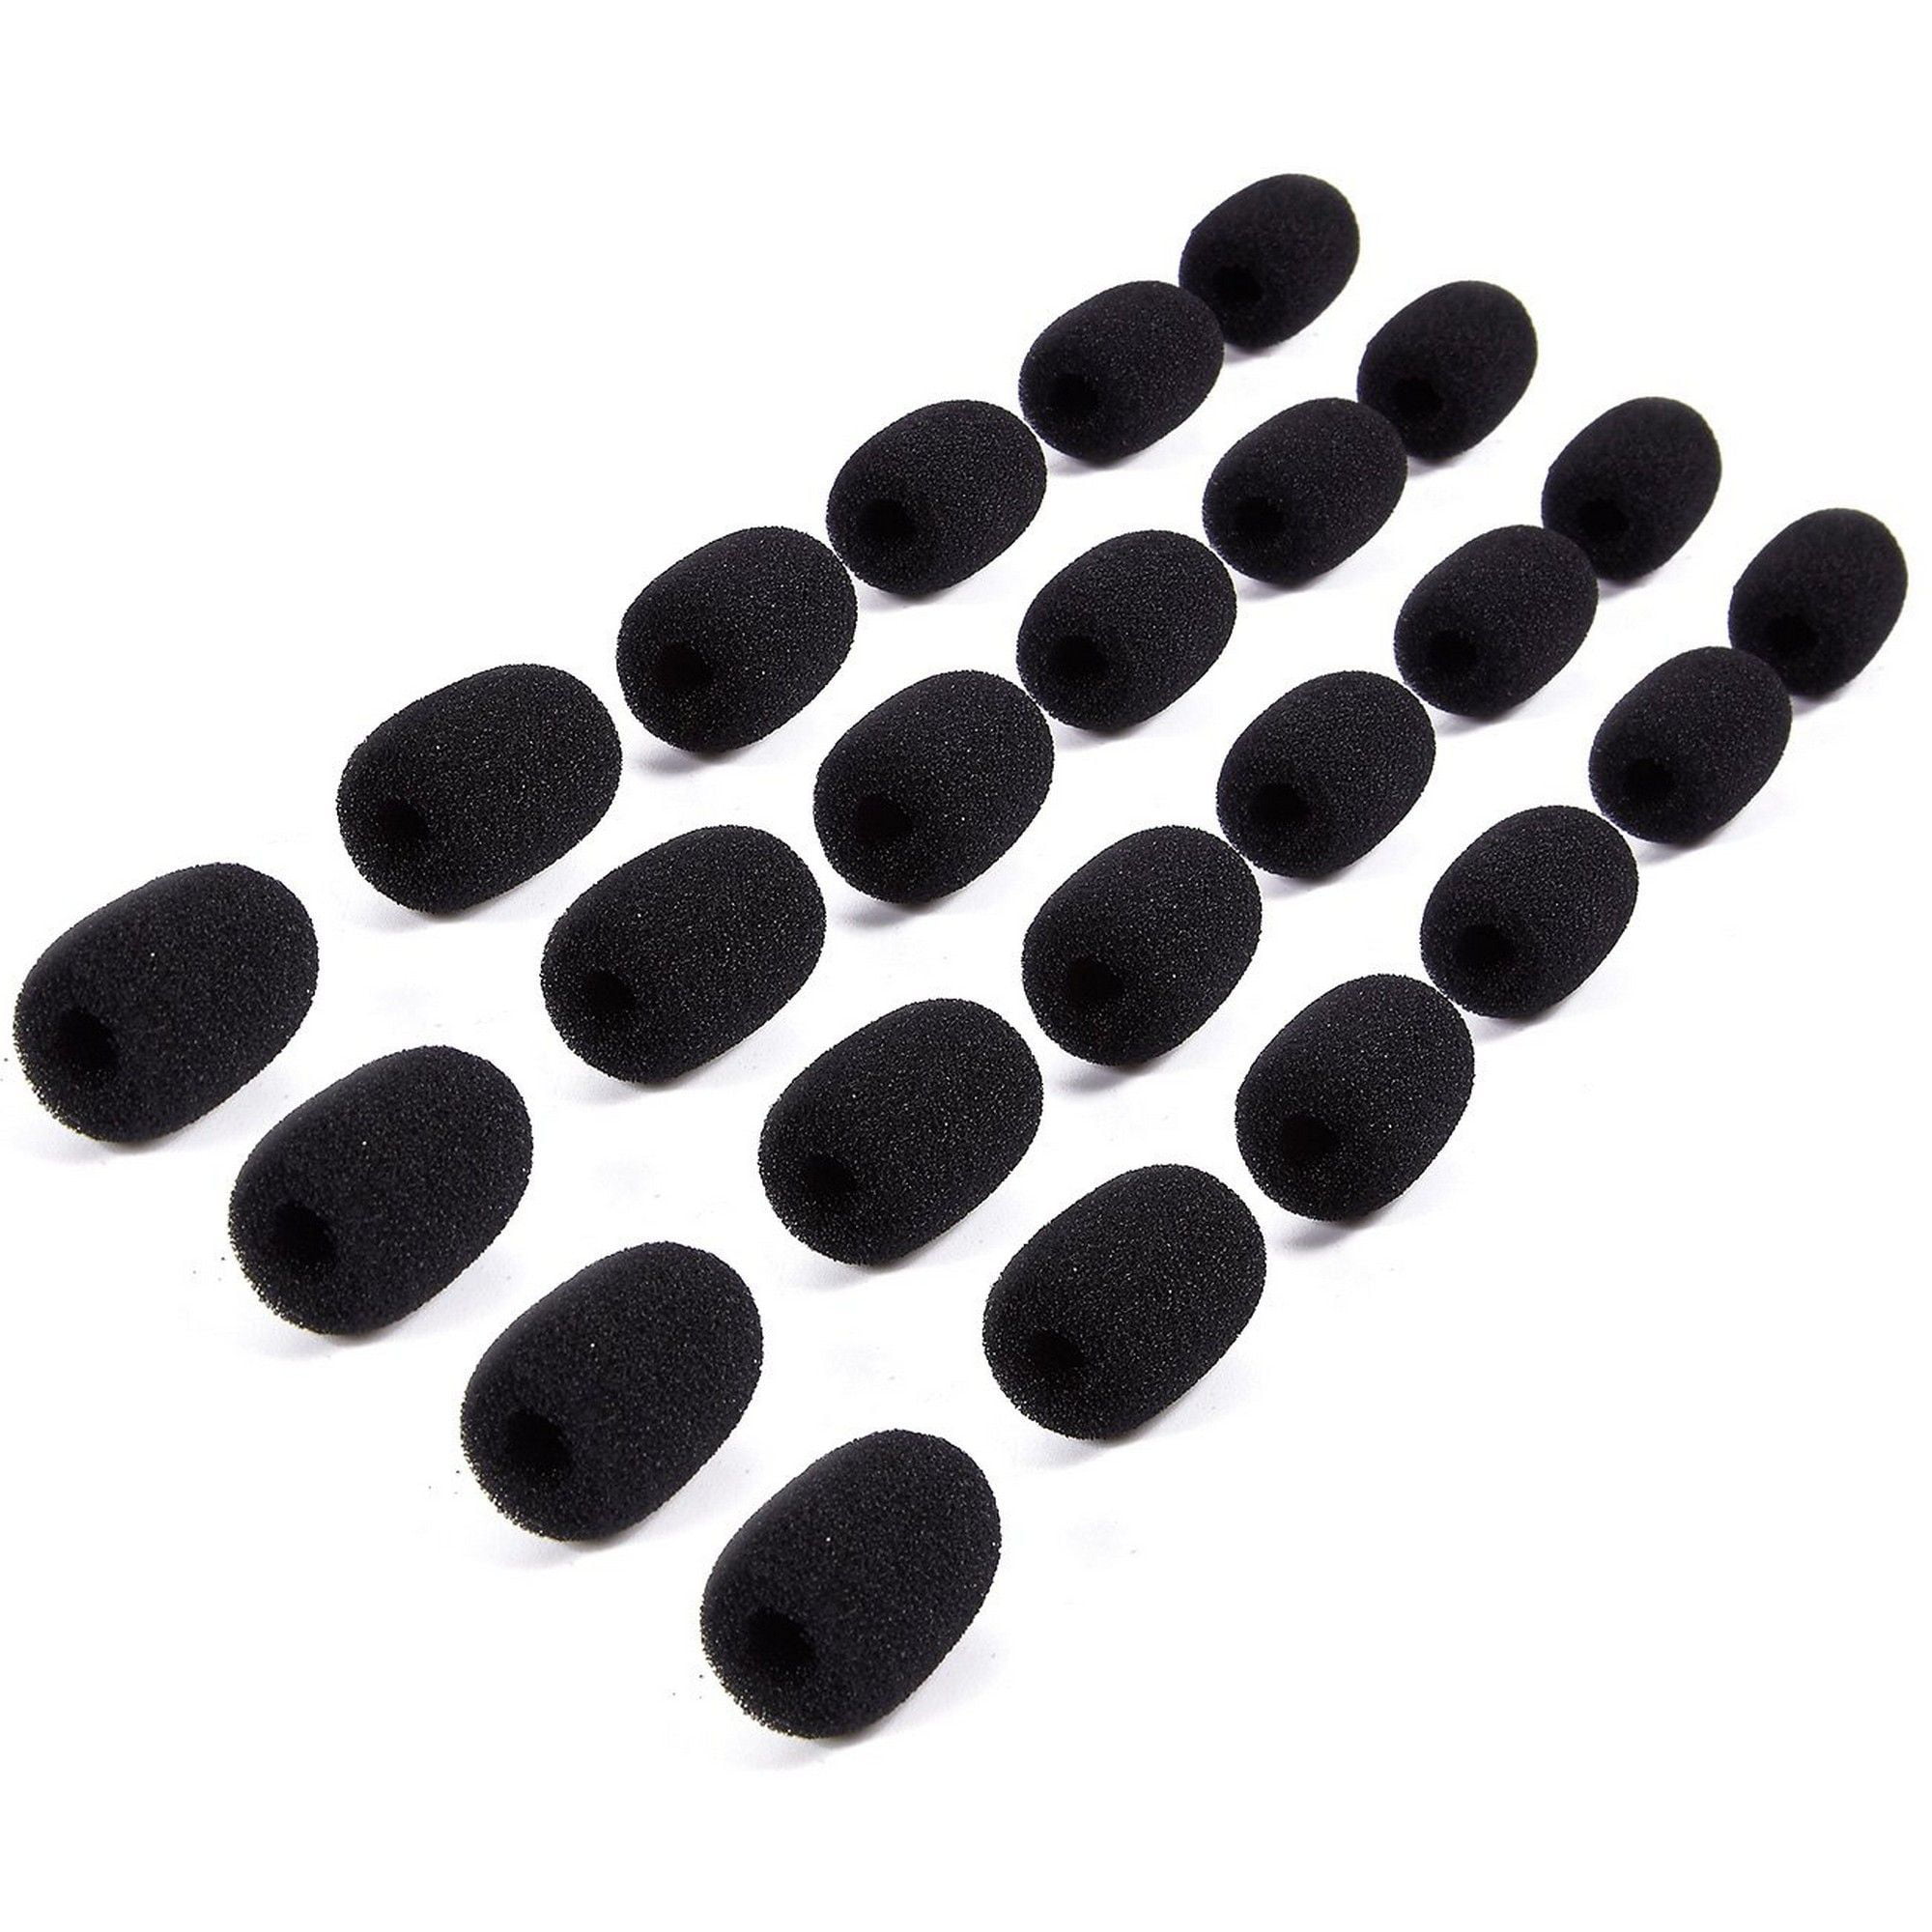 Mini Microphone Windscreens  24-Pack Microphone Foam Cover for Lapel, Lavalier, and Headset Microphones, Black